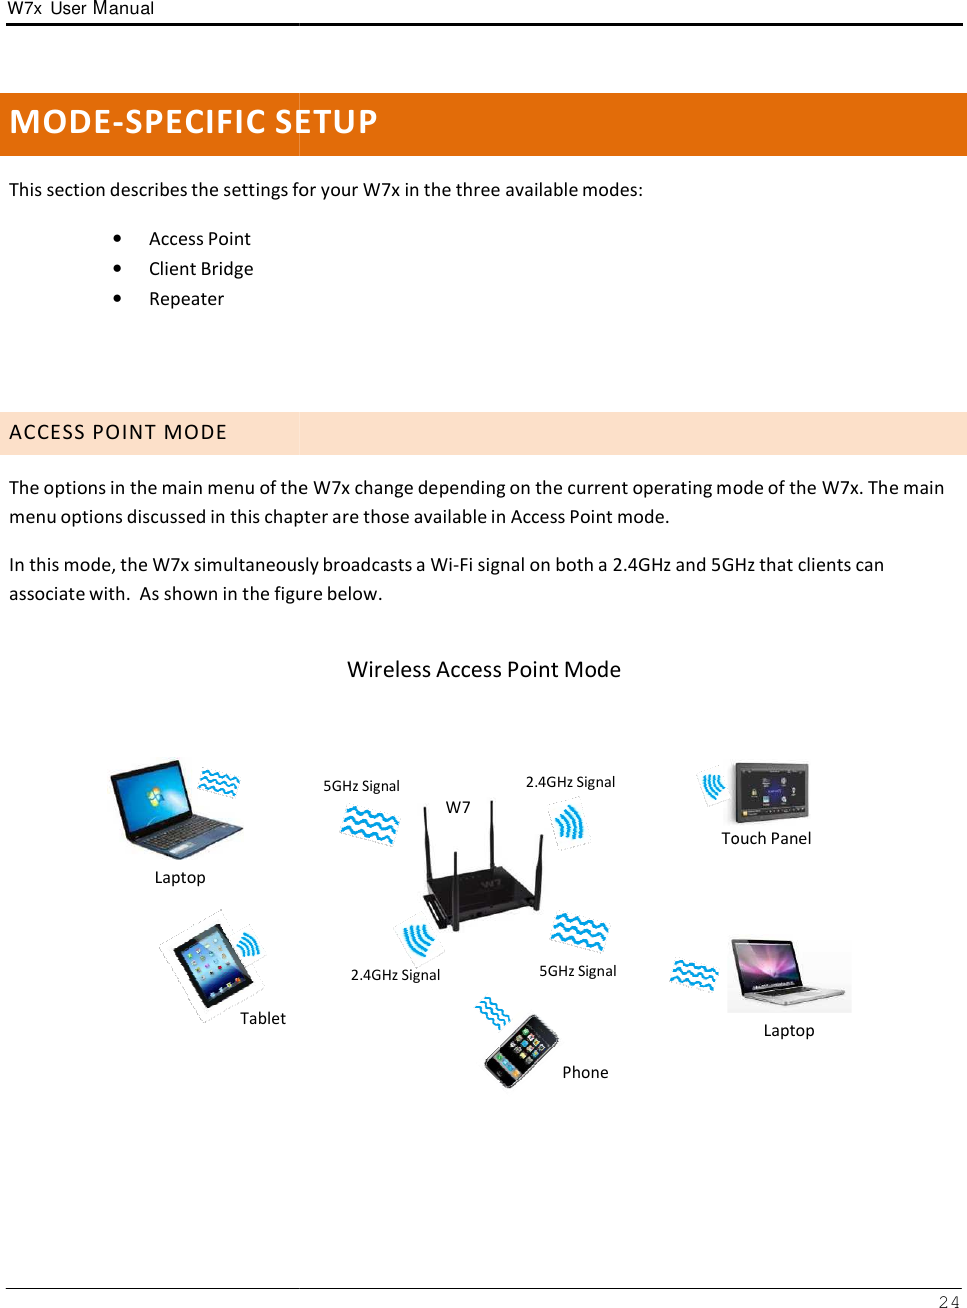 W7x  User Manual       MODE-SPECIFIC SE  This section describes the settings for •   Access Point •   Client Bridge •   Repeater      A C C E S S  P O I N T  M O D E  The options in the main menu of themenu options discussed in this chap In this mode, the W7x simultaneousassociate with.  As shown in the figu       Laptop      Tablet  ETUP for your W7x in the three available modes: e W7x change depending on the current operating mopter are those available in Access Point mode. sly broadcasts a Wi-Fi signal on both a 2.4GHz and 5GHzure below. Wireless Access Point Mode 5GHz Signal W7 2.4GHz Signal    Touch 2.4GHz Signal  5GHz Signal    Phone 24 mode of the W7x. The main 5GHz that clients can    Touch Panel Laptop 